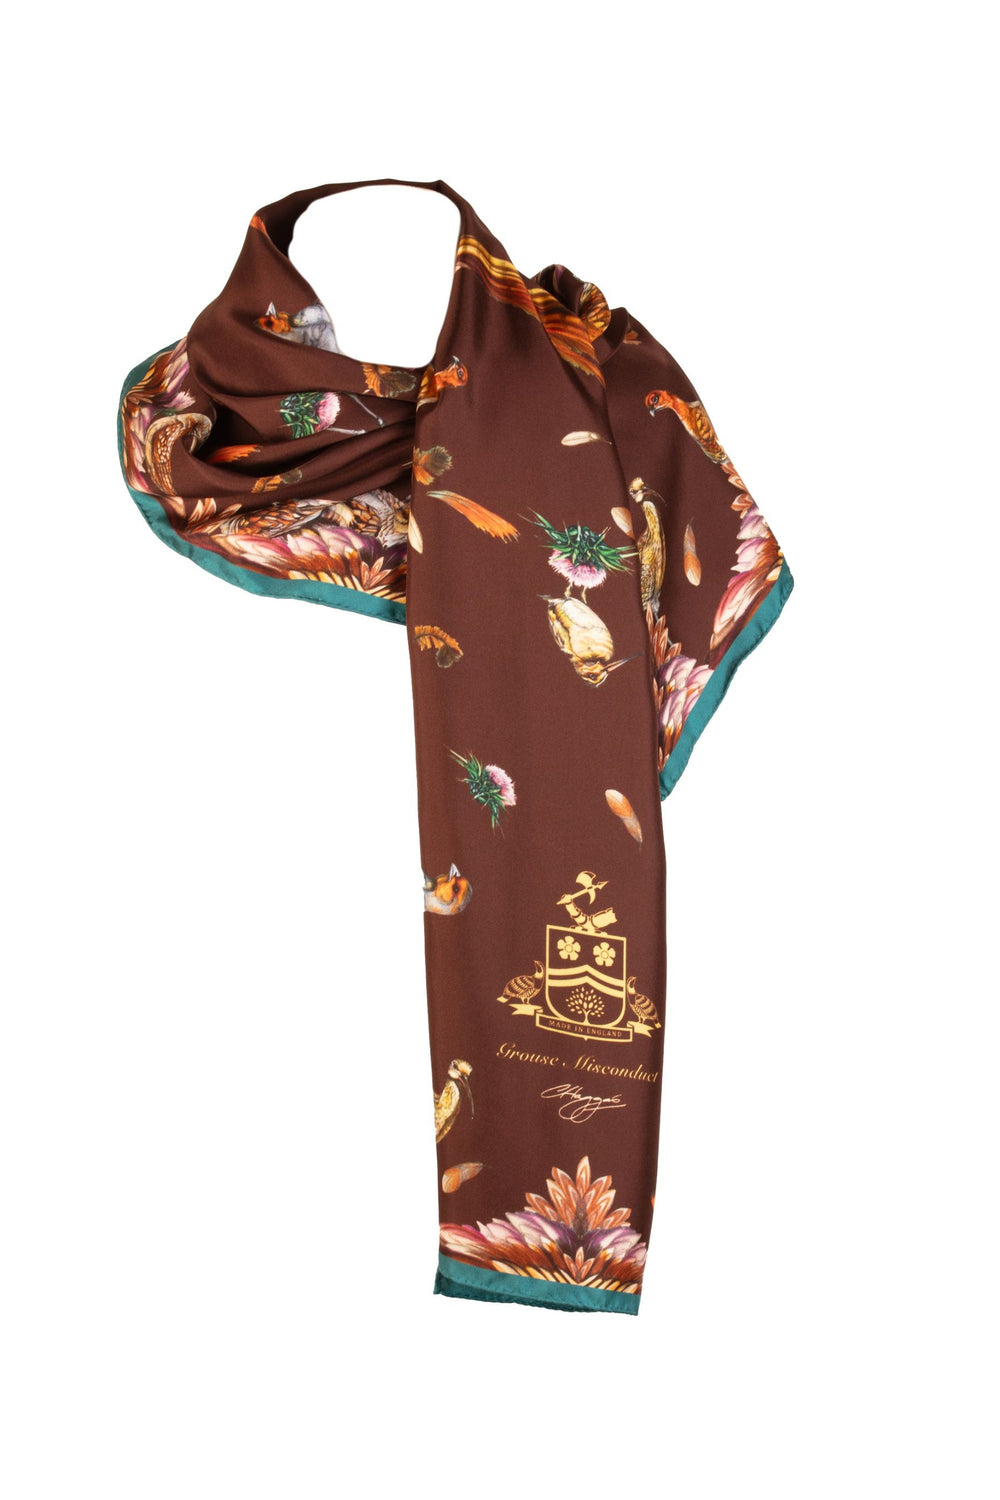 Classic Grouse Misconduct Silk Scarf Chocolate & Teal